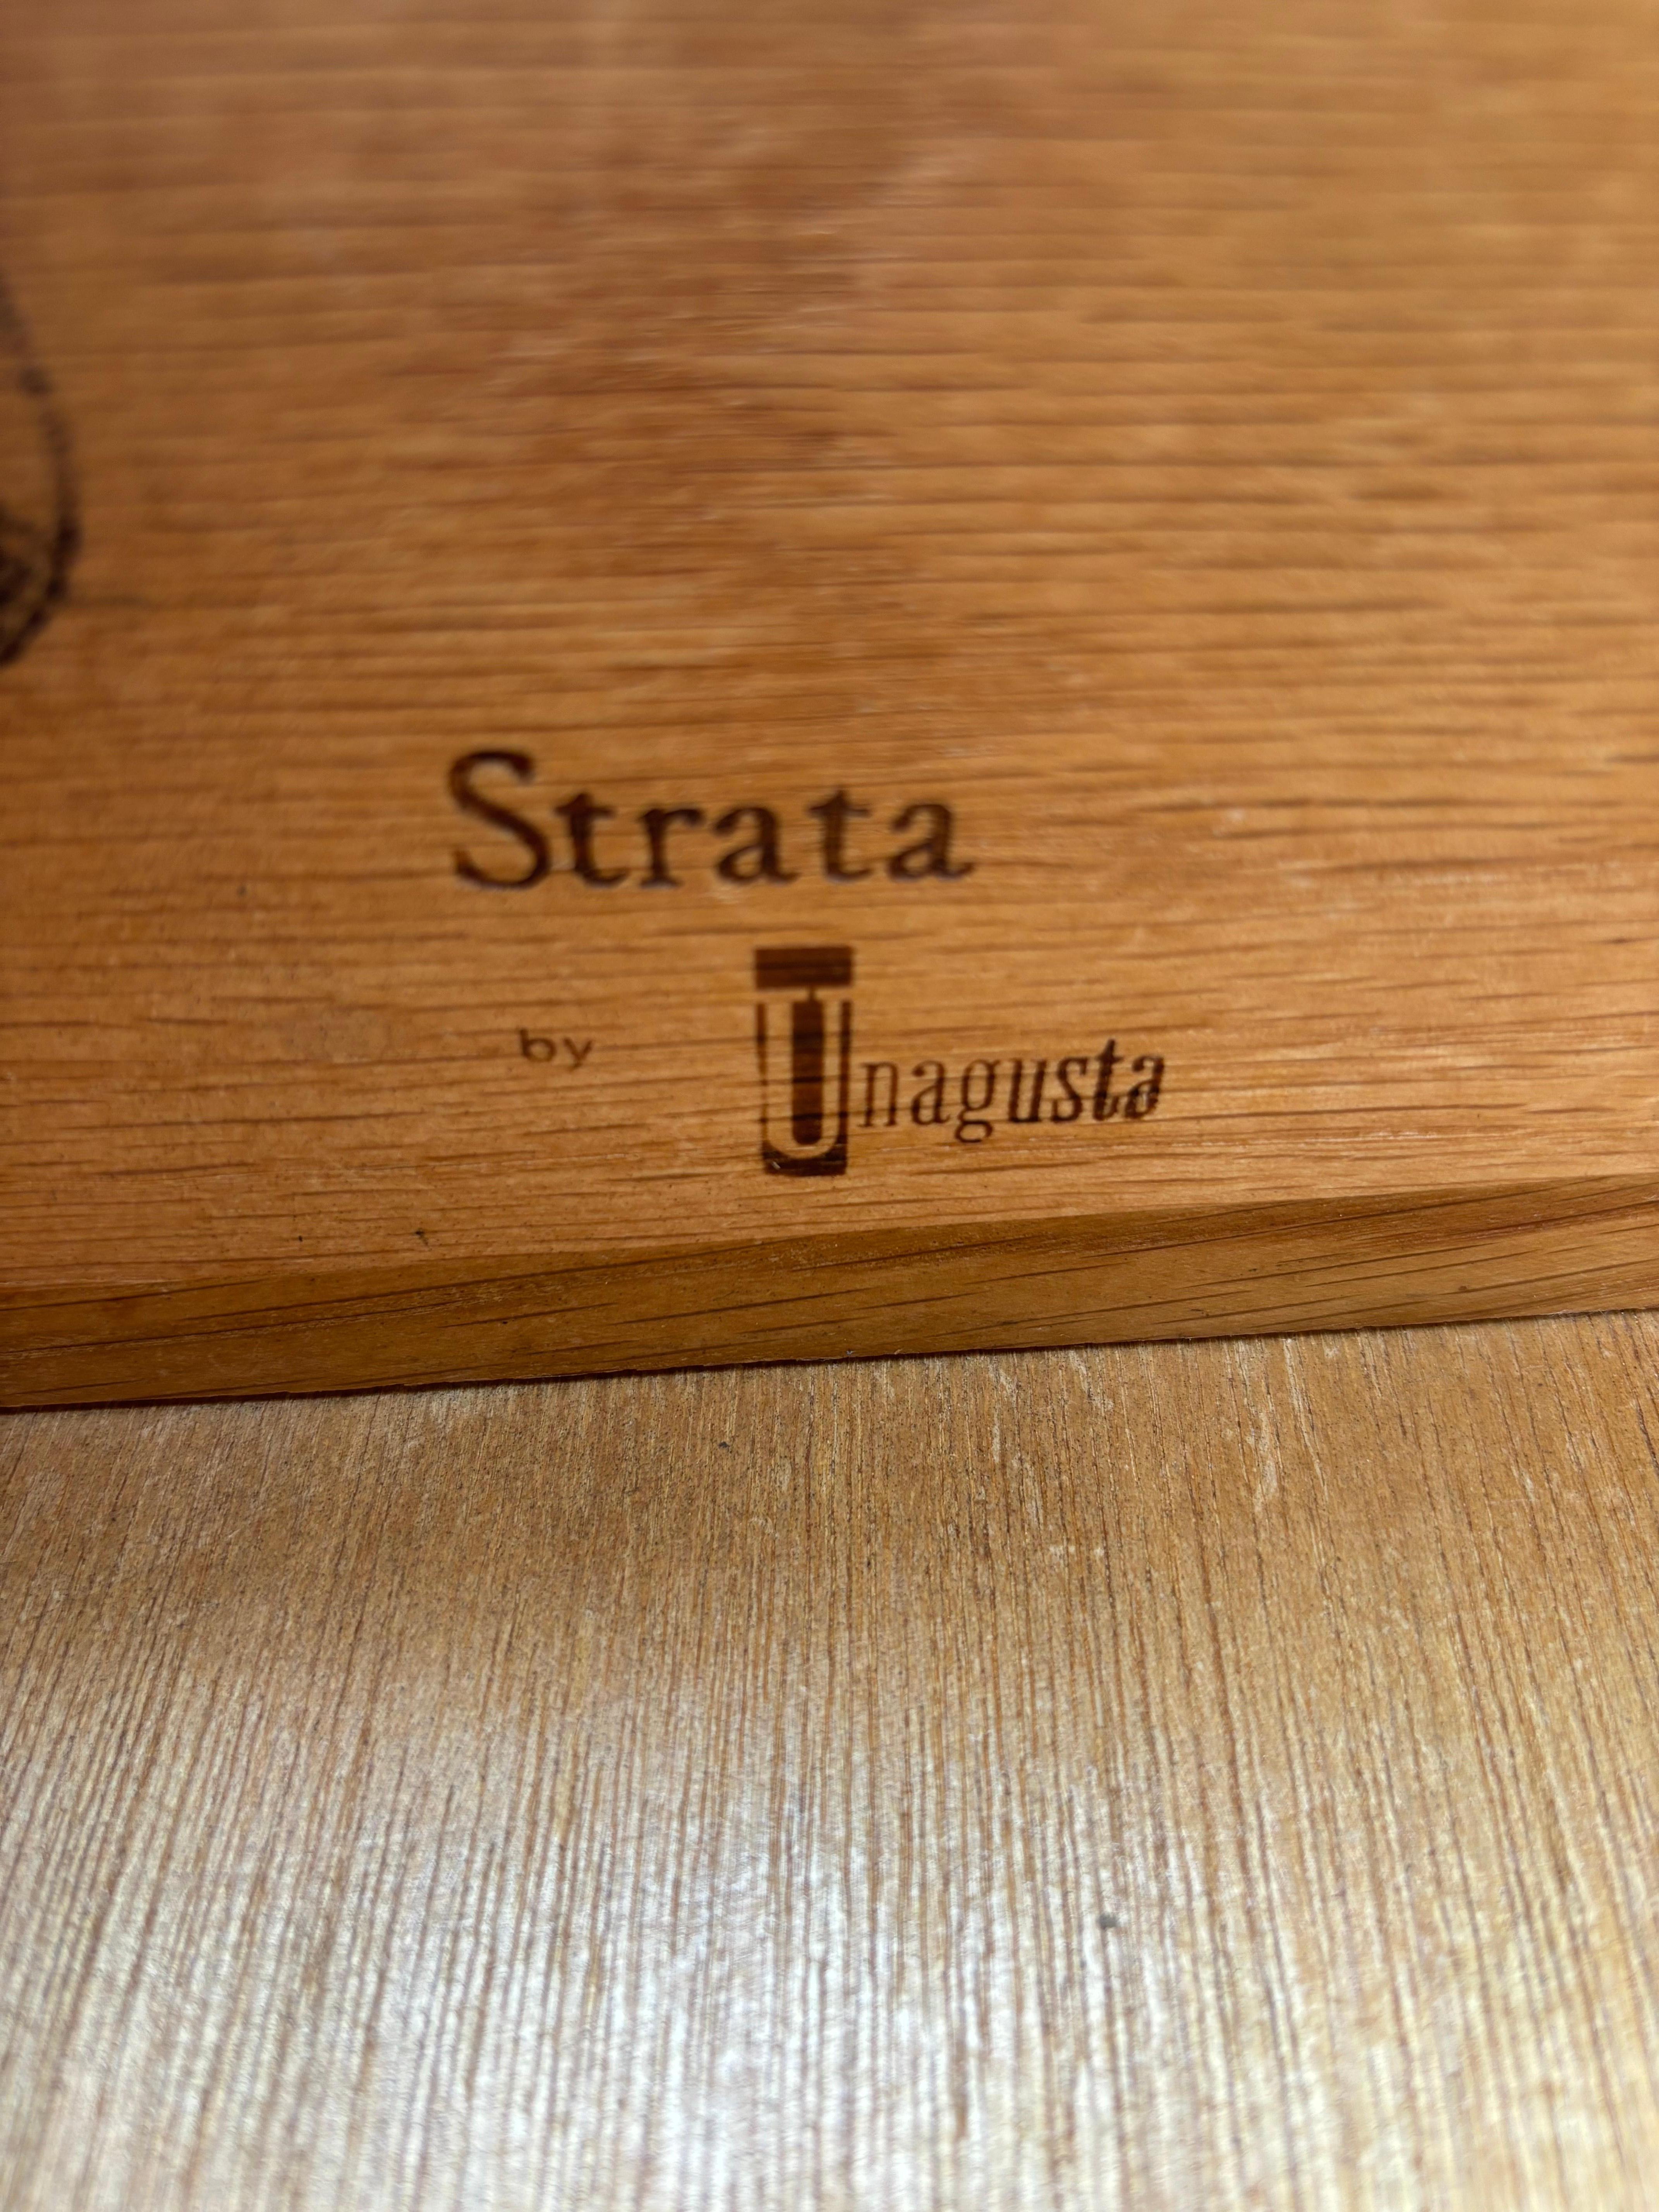 Strata by Unagusta Concave Front Walnut 2 Drawer Nightstand In Good Condition For Sale In Philadelphia, PA